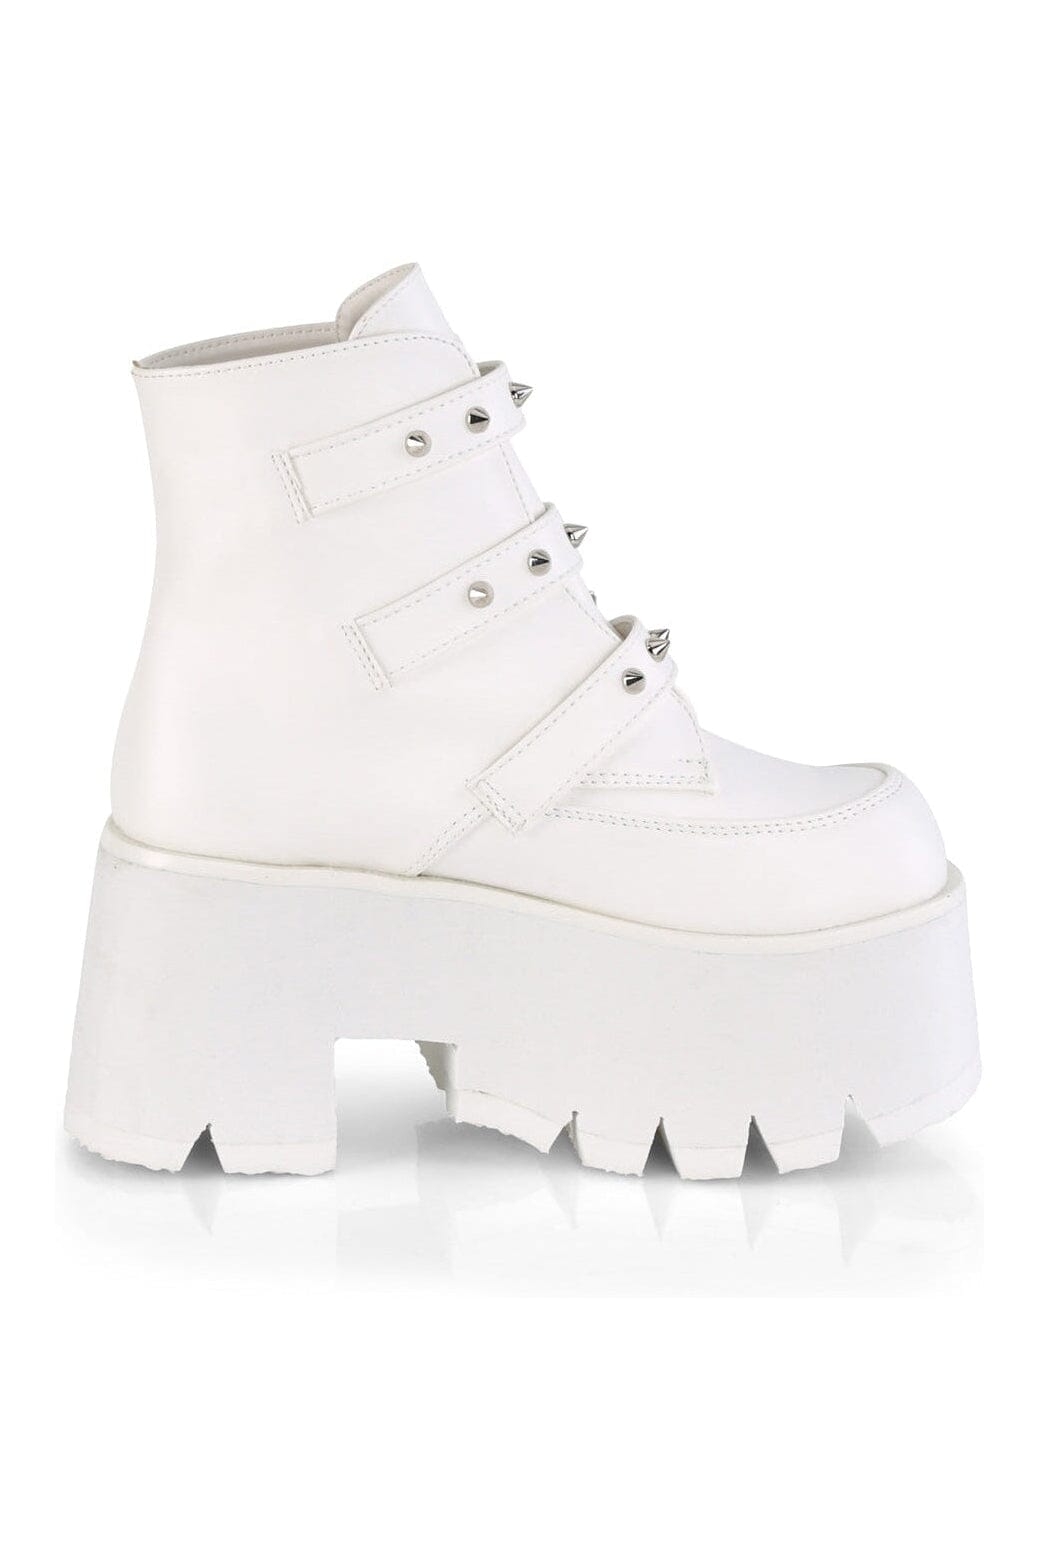 ASHES-55 White Vegan Leather Ankle Boot-Ankle Boots-Demonia-SEXYSHOES.COM